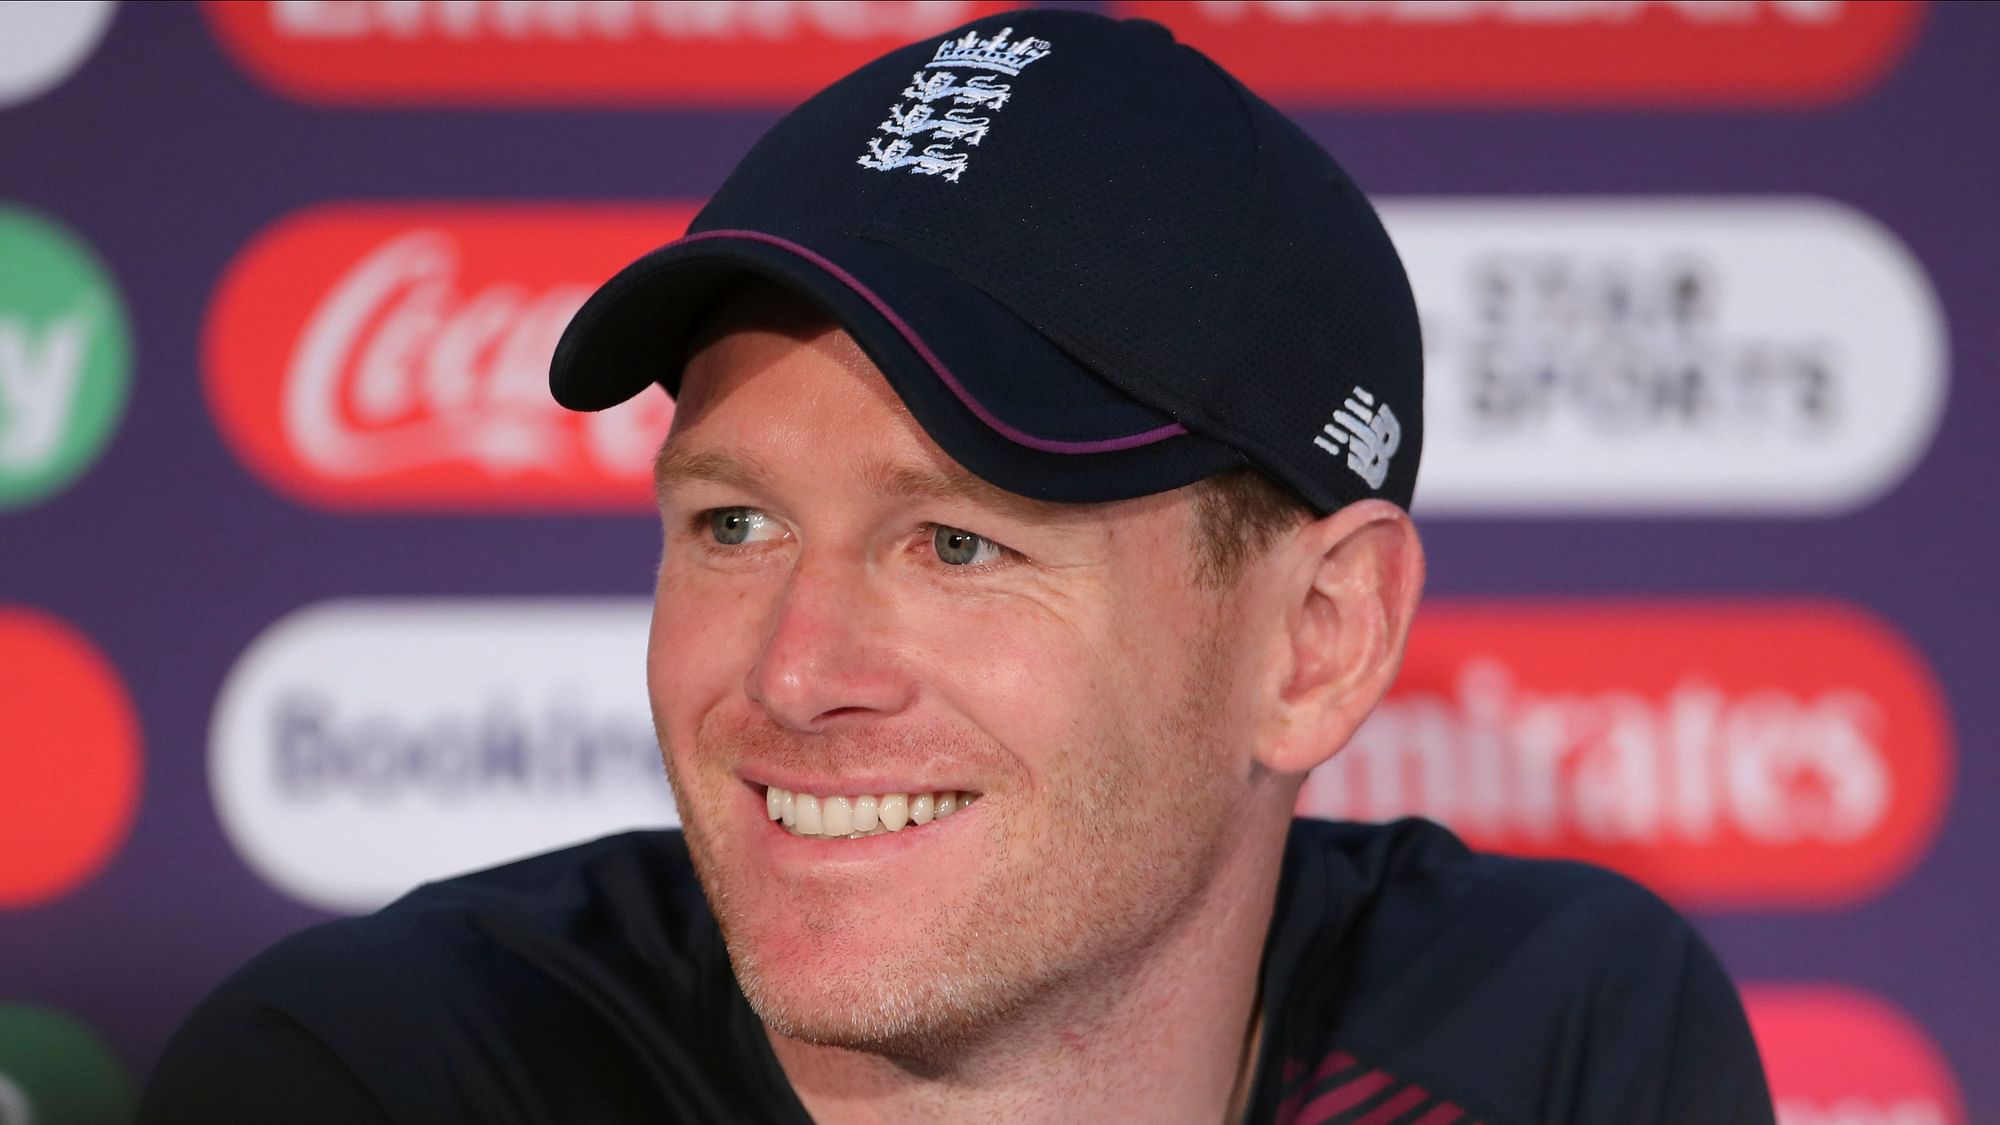 England captain Eoin Morgan speaks during a press conference after attending a training session ahead of the Cricket World Cup final match.